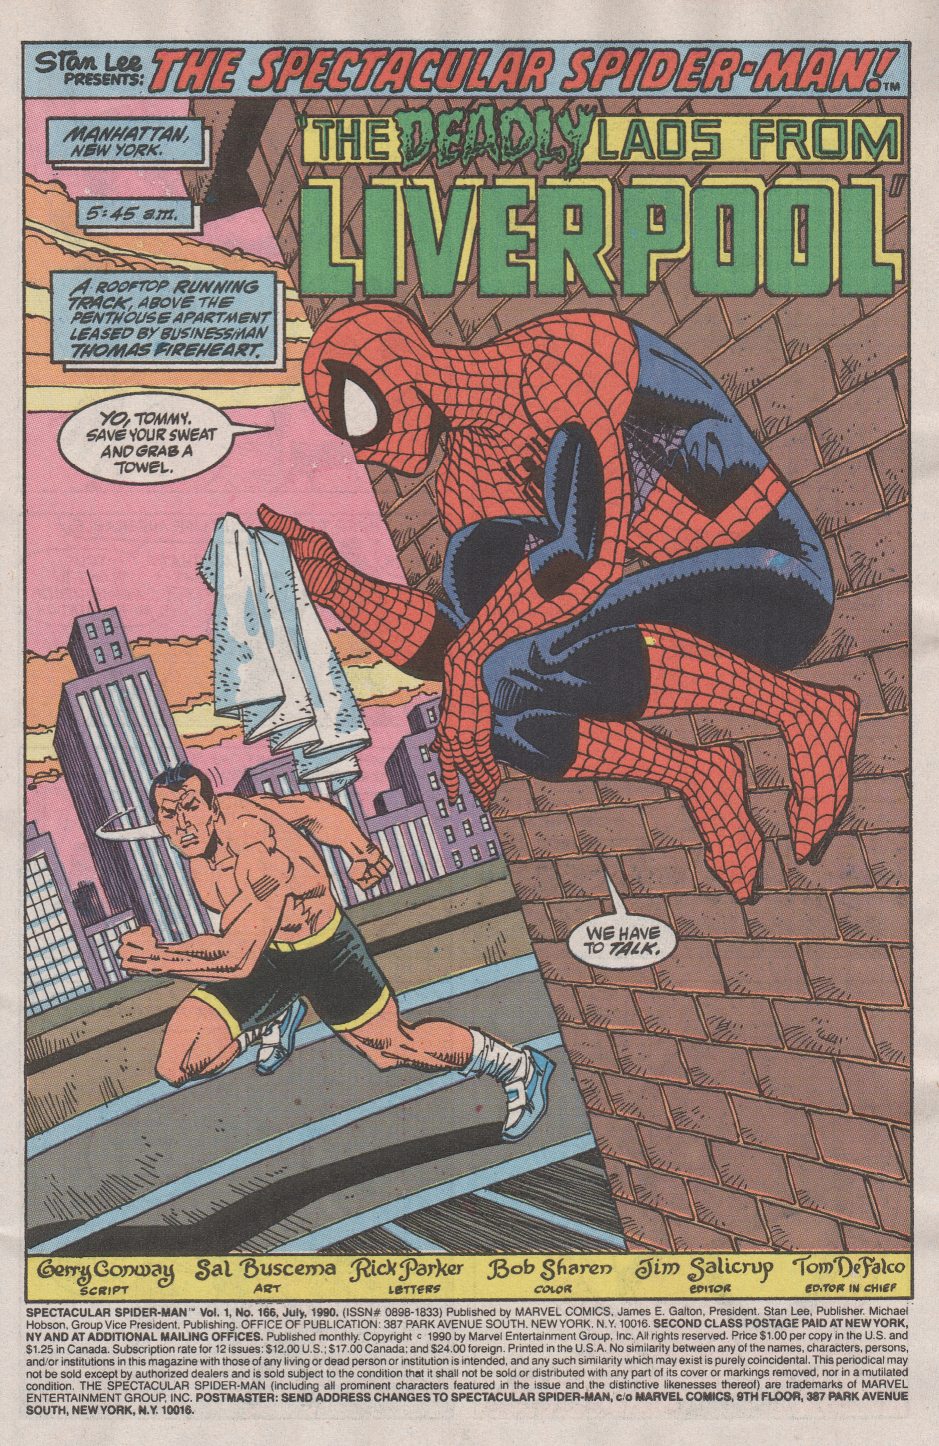 The Spectacular Spider Man 1976 Issue 166 | Read The Spectacular Spider Man  1976 Issue 166 comic online in high quality. Read Full Comic online for  free - Read comics online in high quality .|